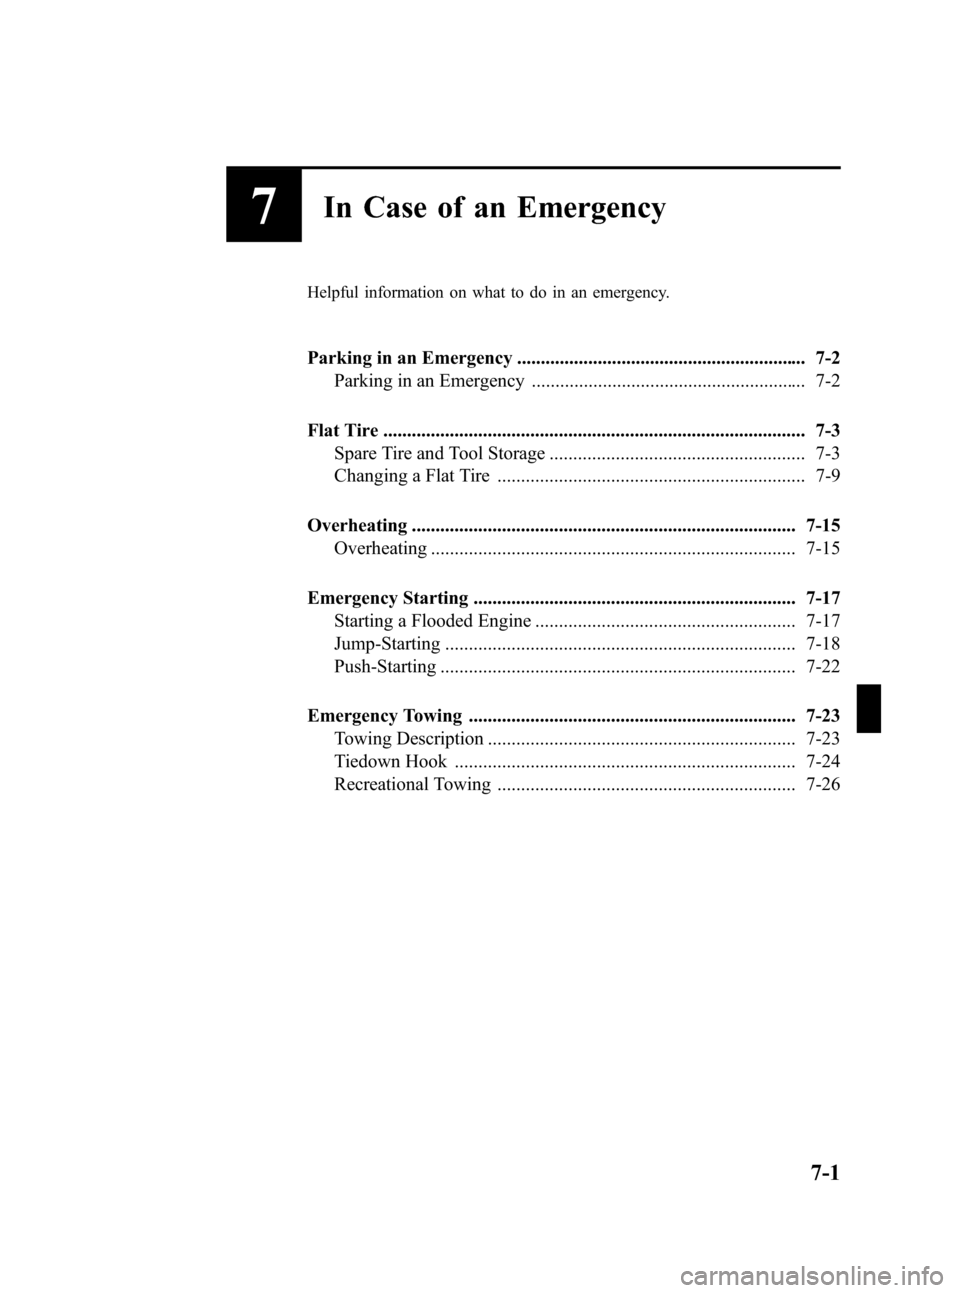 MAZDA MODEL 3 HATCHBACK 2011  Owners Manual (in English) Black plate (347,1)
7In Case of an Emergency
Helpful information on what to do in an emergency.
Parking in an Emergency ............................................................. 7-2Parking in an E